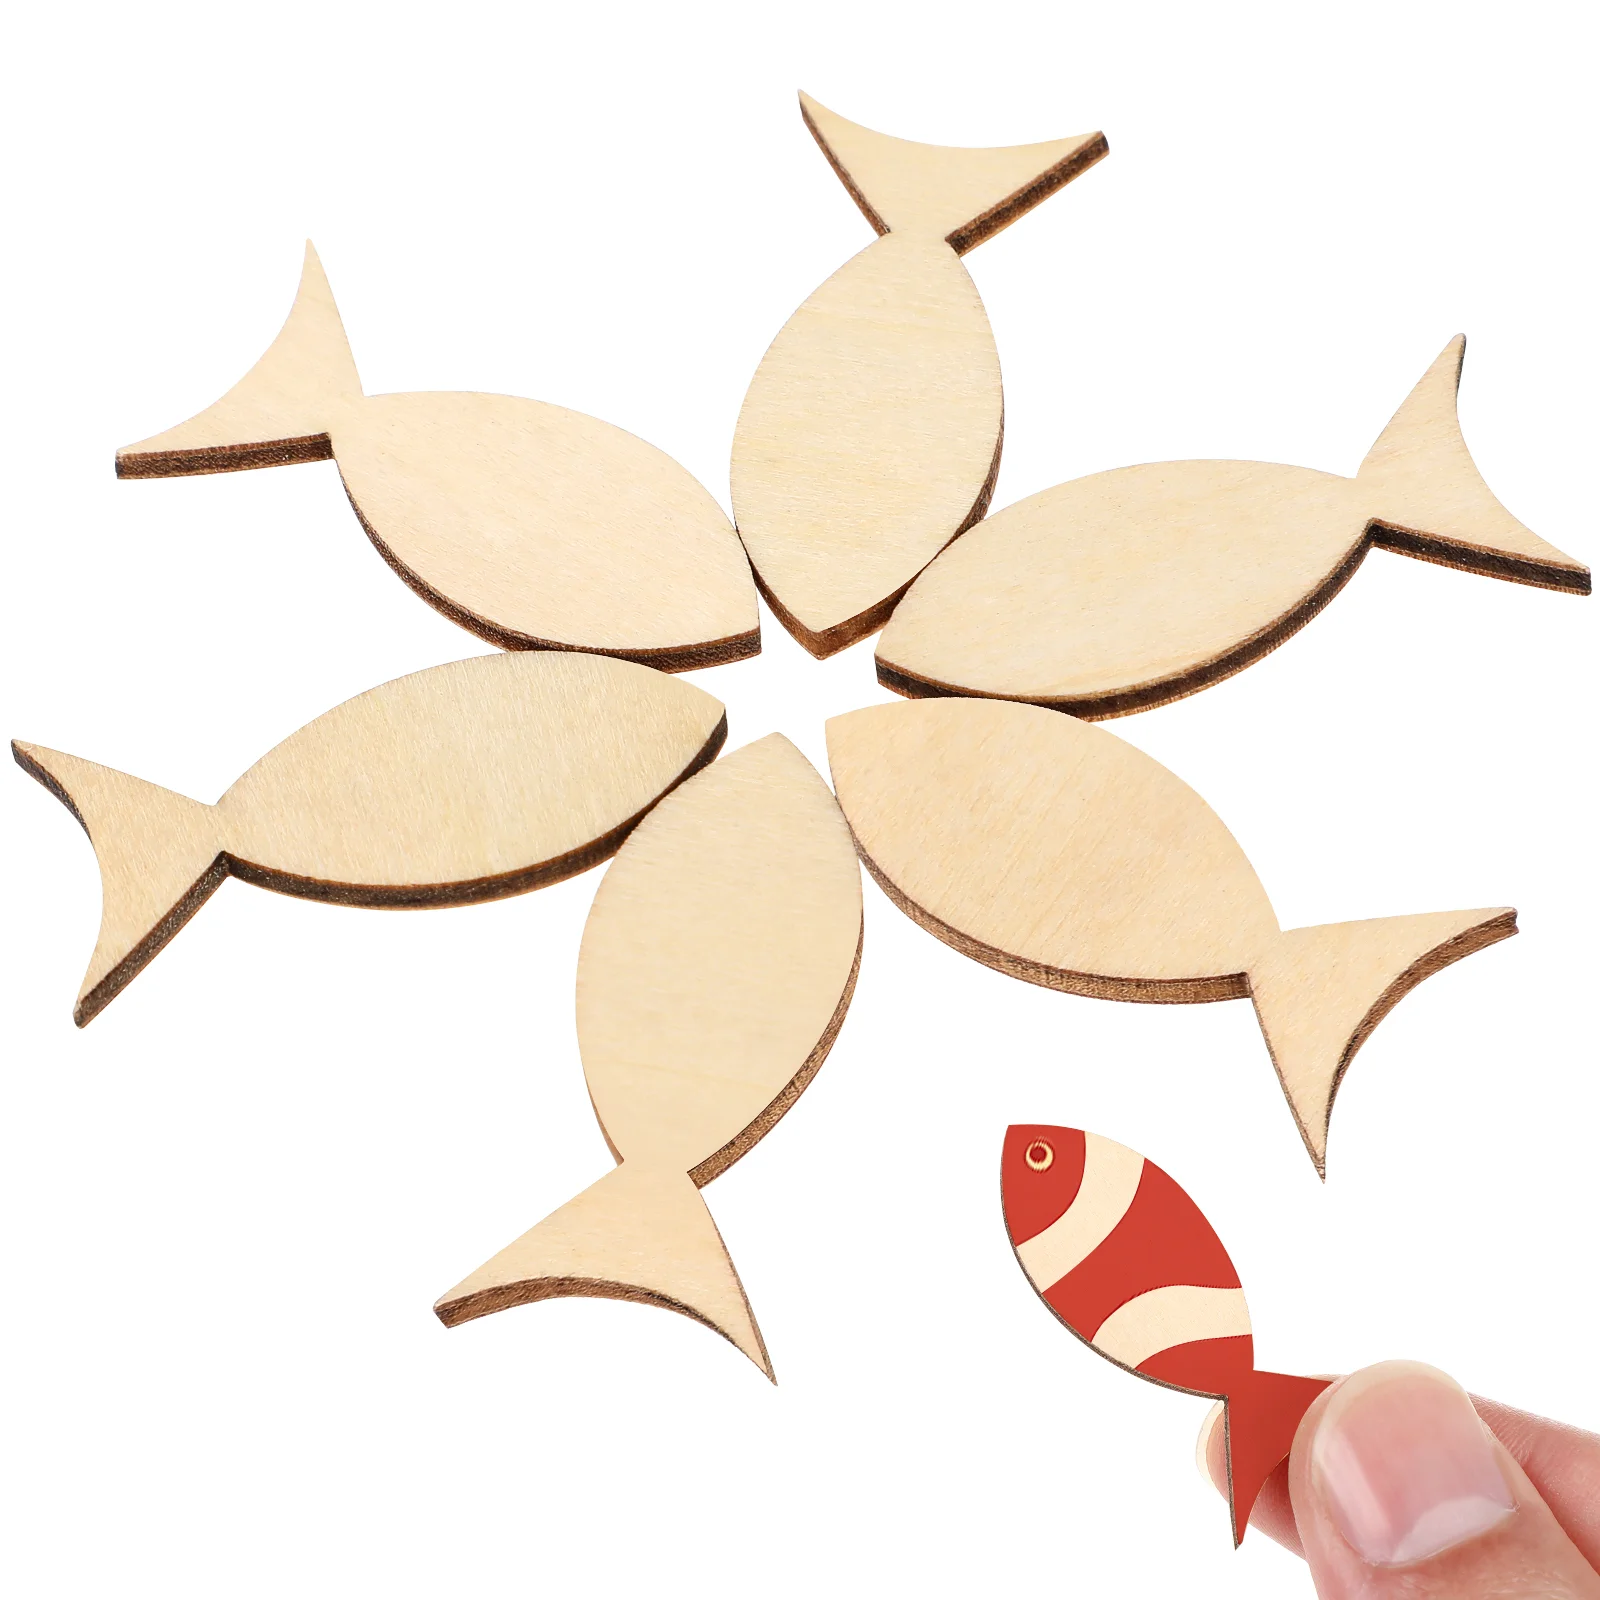 

100 Pcs Wooden Animals Craft Chip Flower Unfinished Slices Shapes Crafting Gift Tags Ship Ornaments